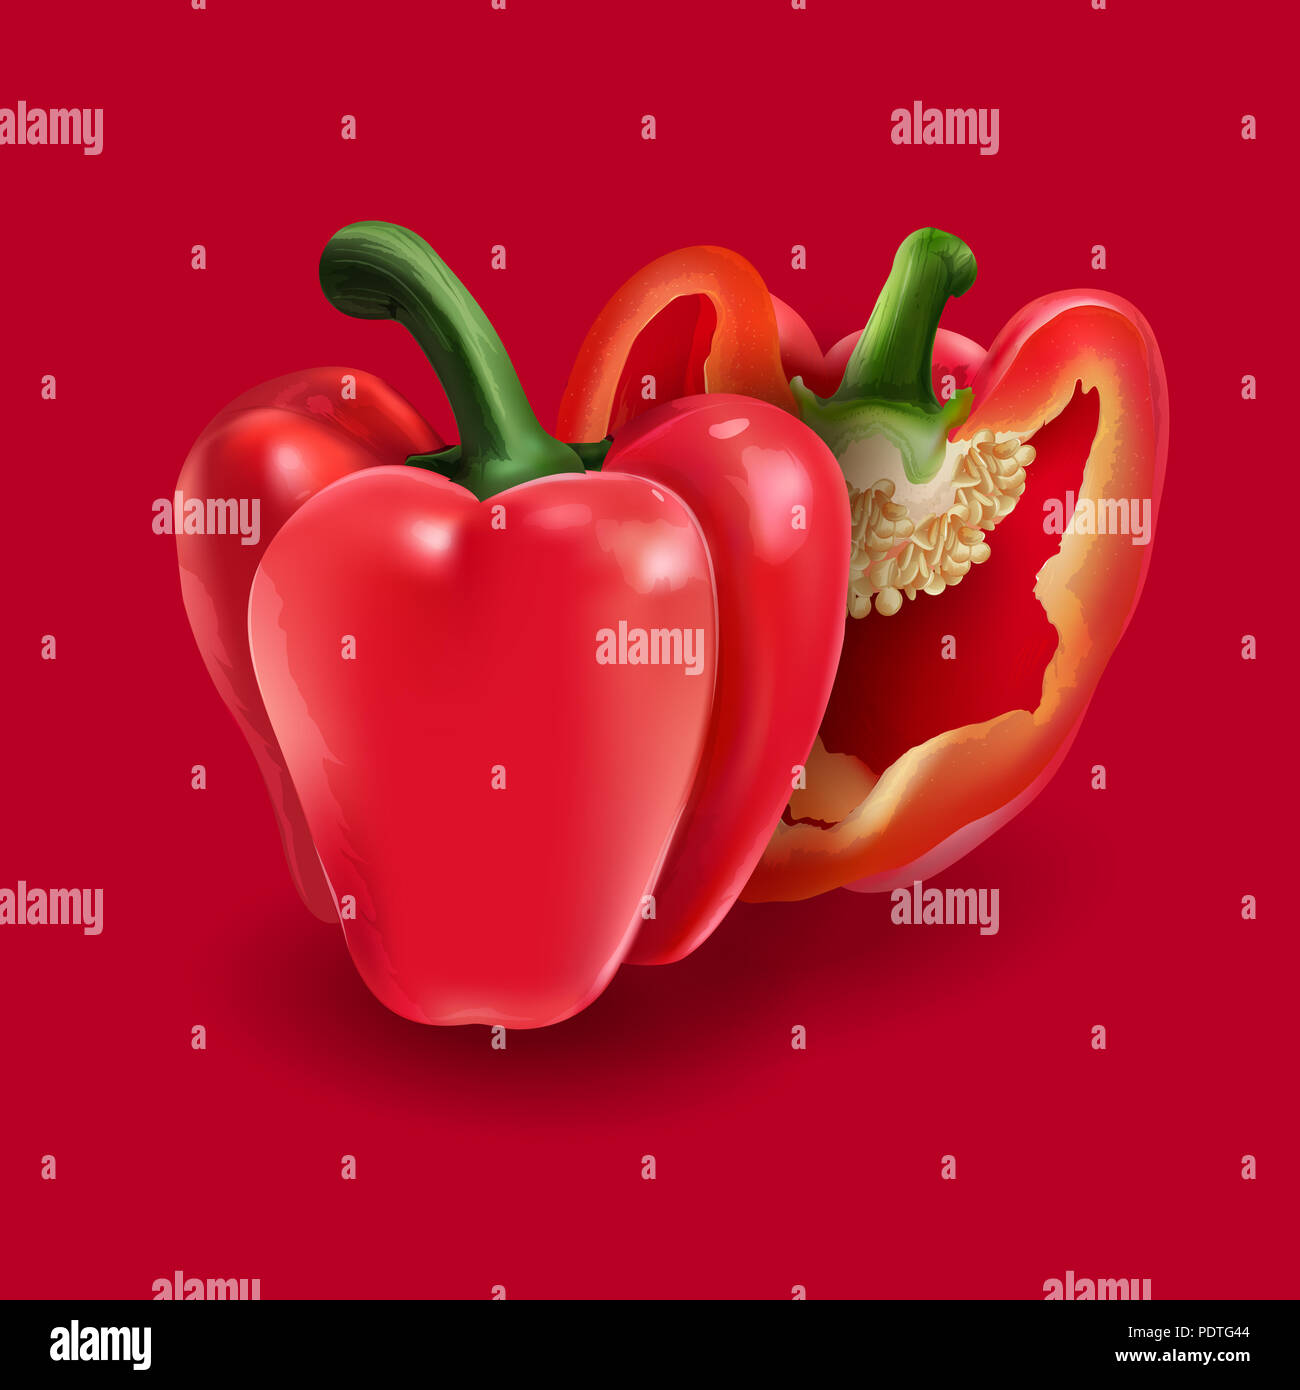 Red pepper on red background Stock Photo